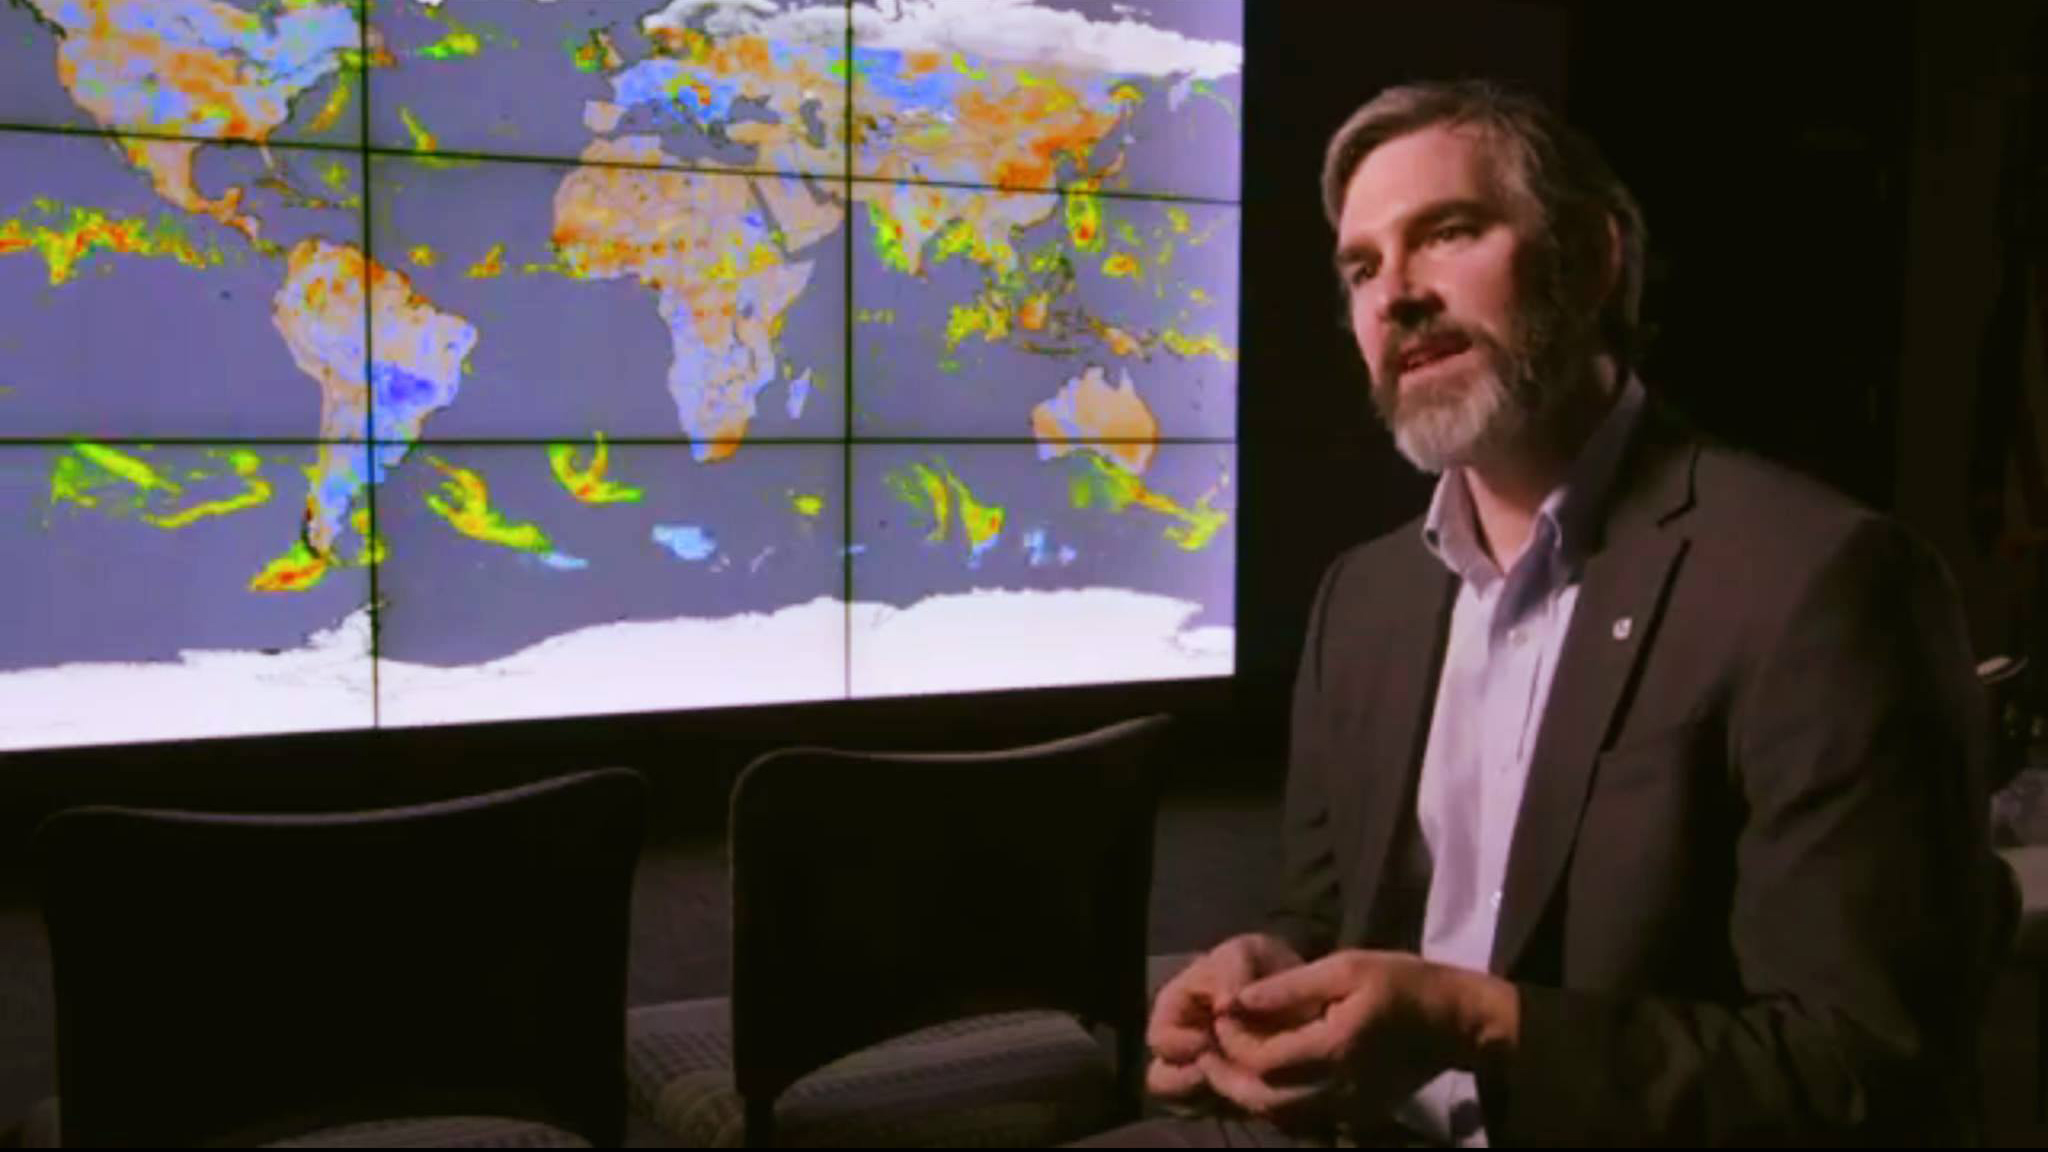 man in suit with a bank of computer monitors projecting a map of Earth in the background